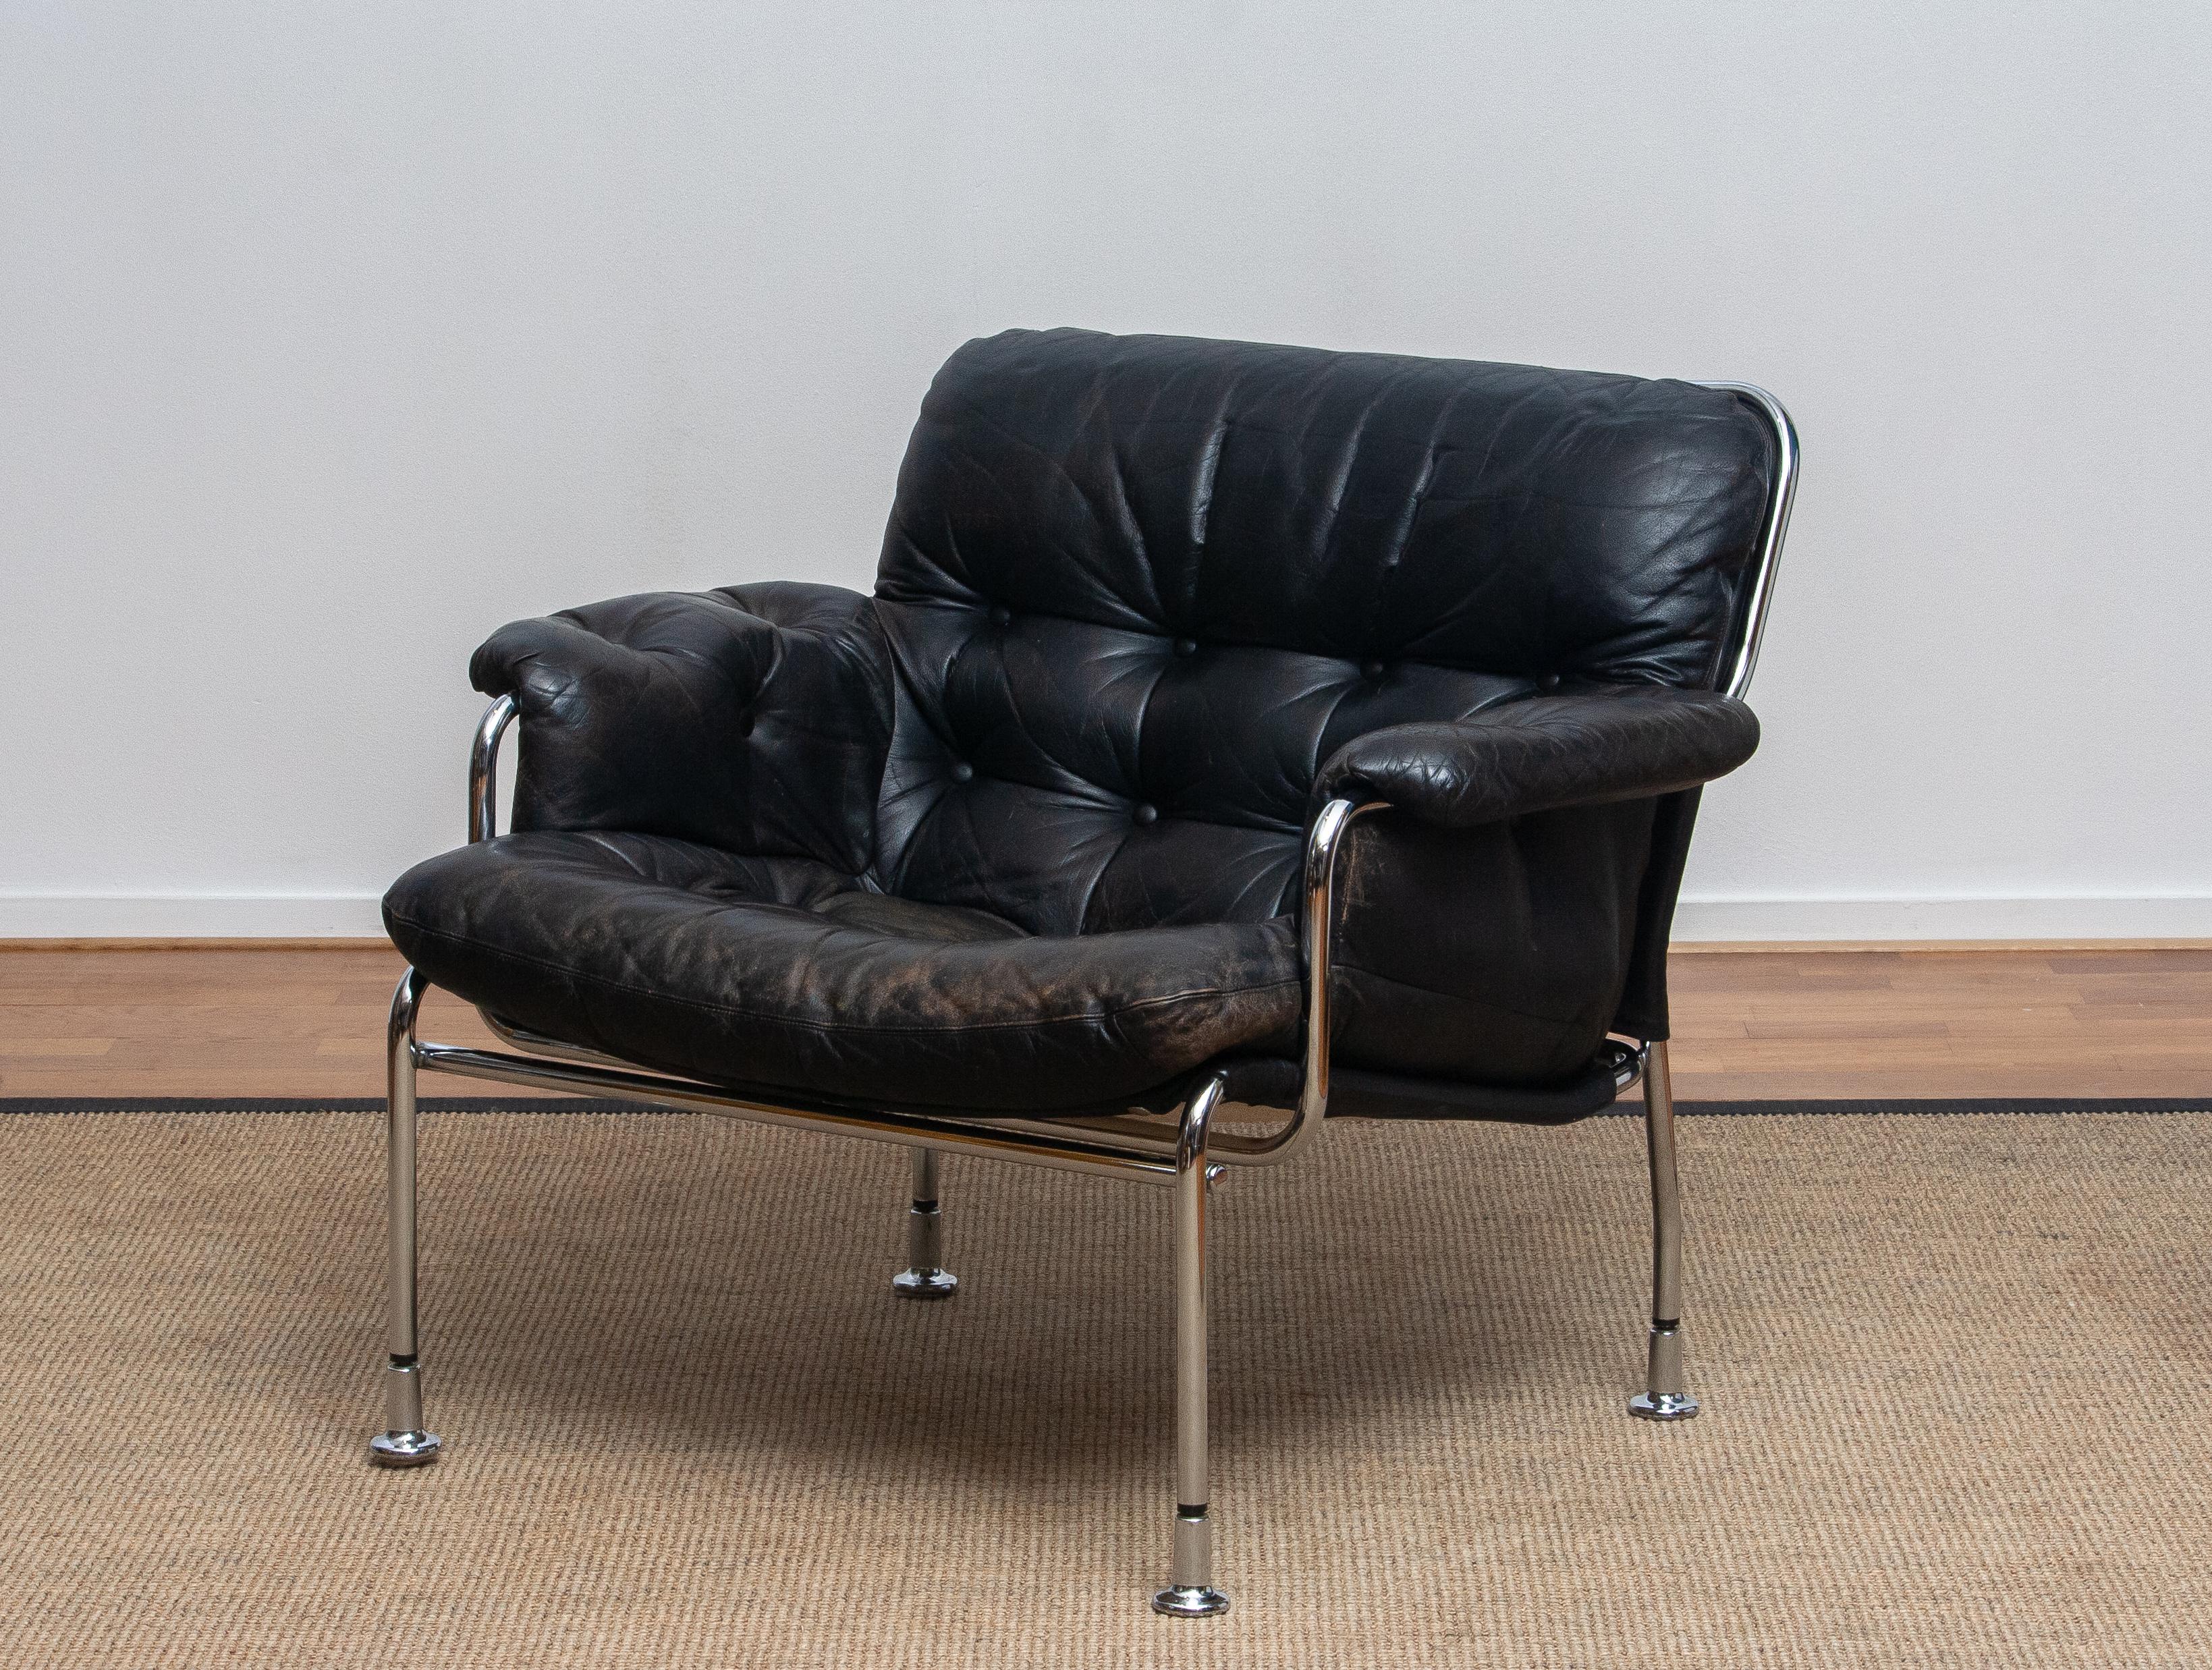 Beautiful tubular lounge / easy chair in aged black leather and chrome designed by Pethrus Lindlöfs for A.B. Lindlöfs Möbler Lammhult Sweden. Model Eva.
The aged leather gives this chair the typical vintage character. The leather is soft and the